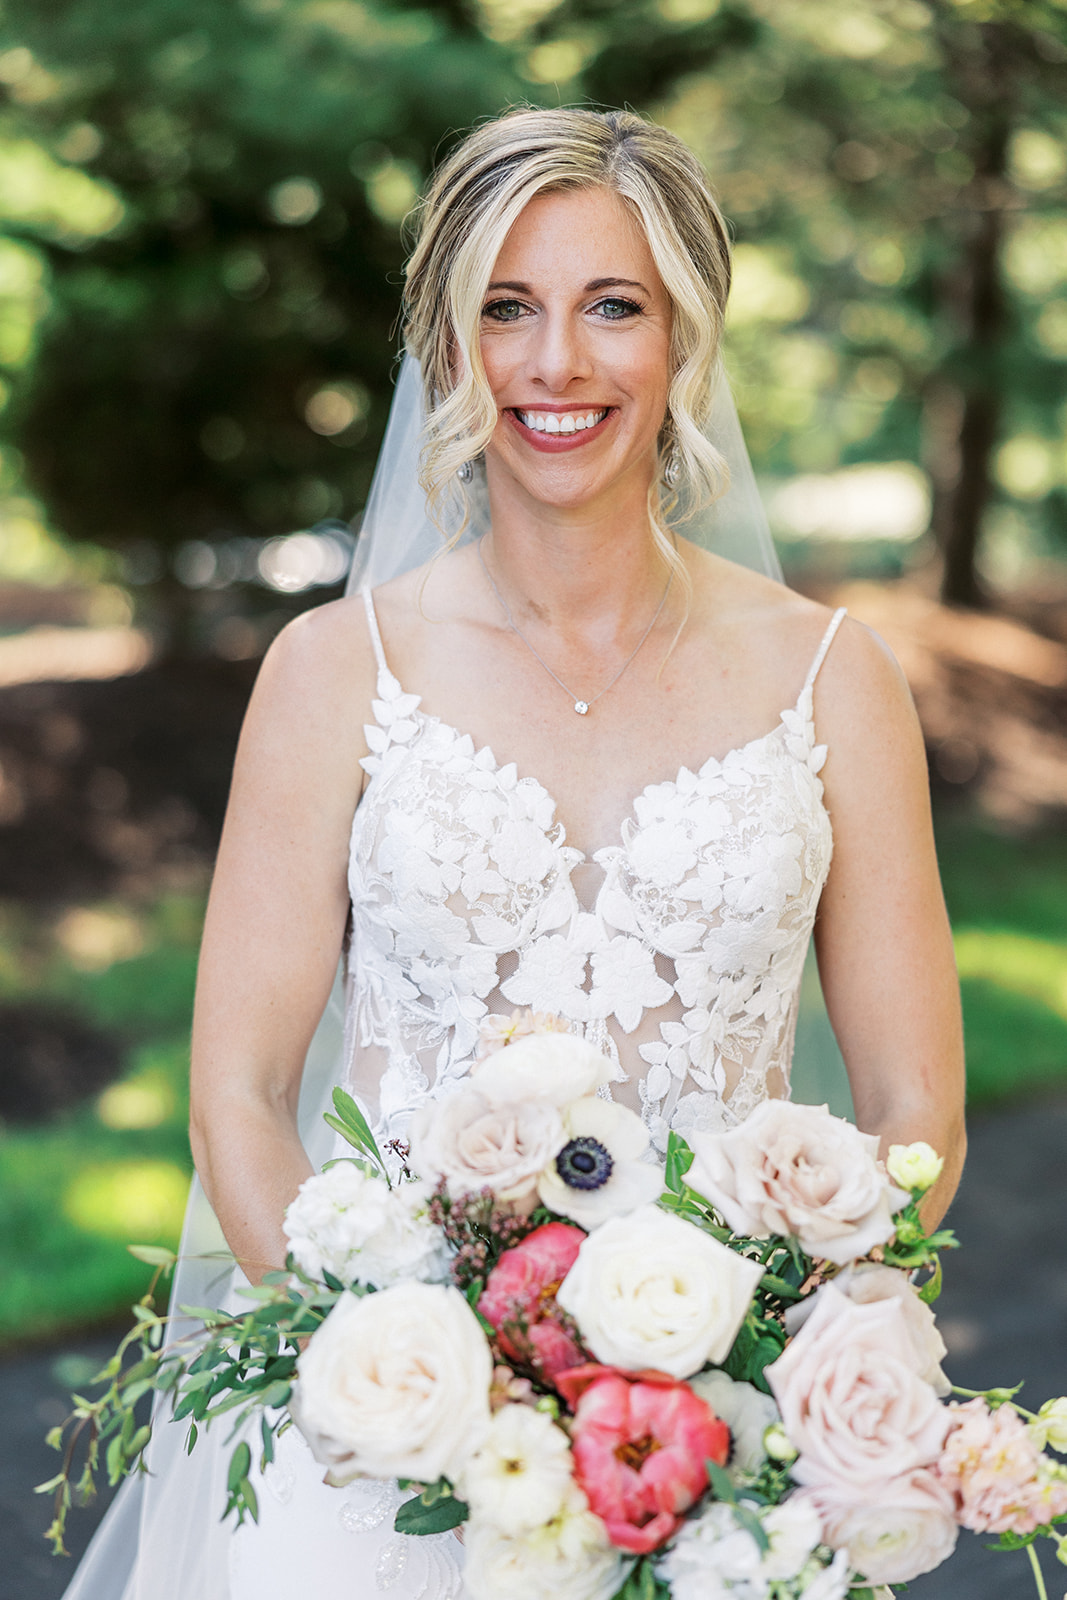 A bride smiles while holding her colorful bouquet in a garden